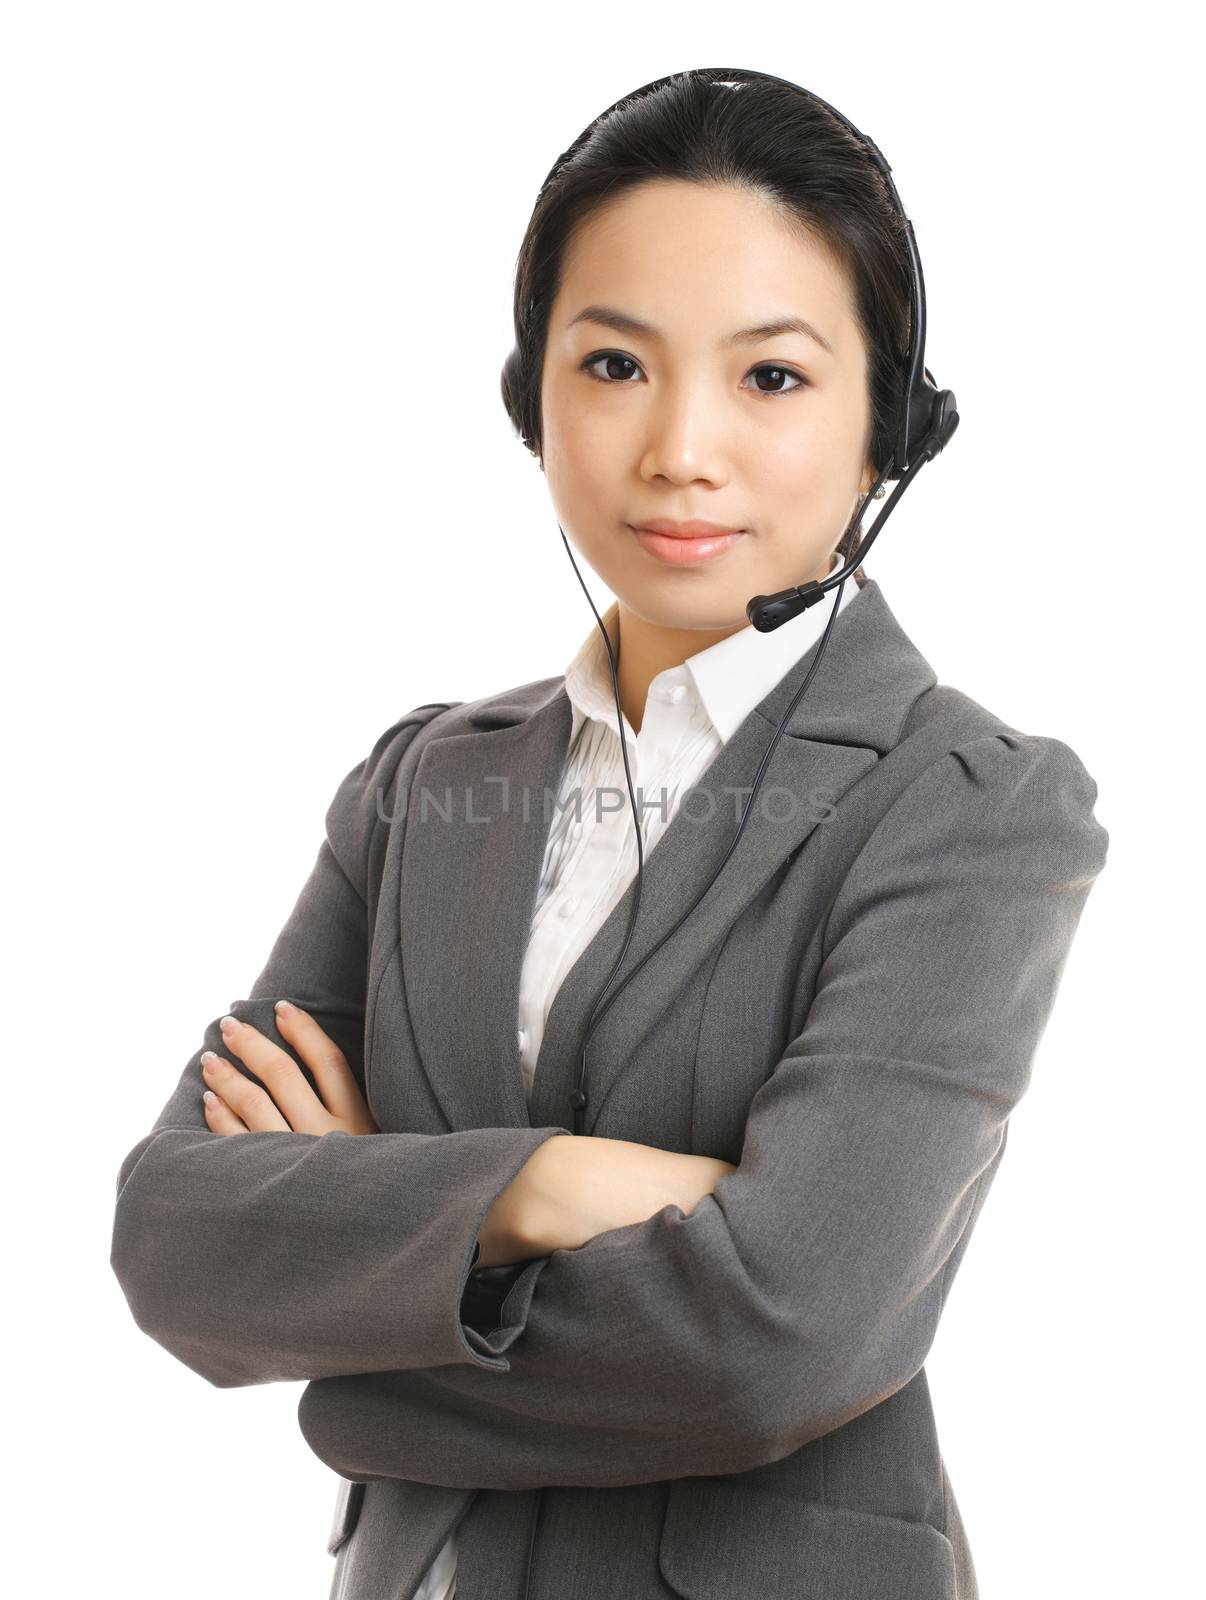 business woman with headset by leungchopan